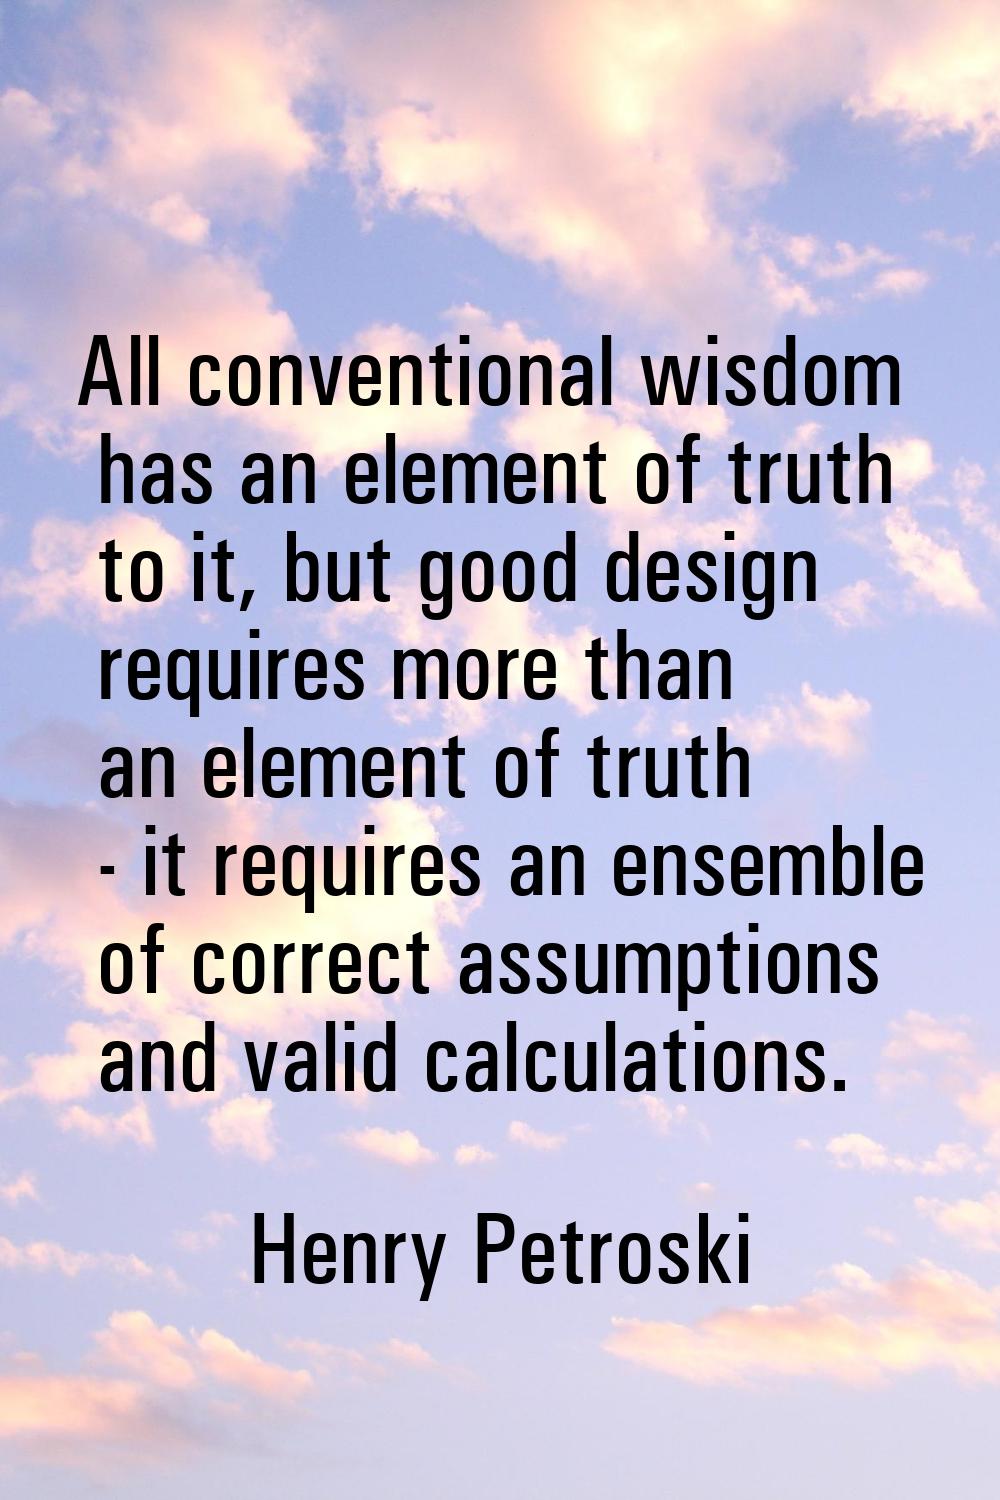 All conventional wisdom has an element of truth to it, but good design requires more than an elemen